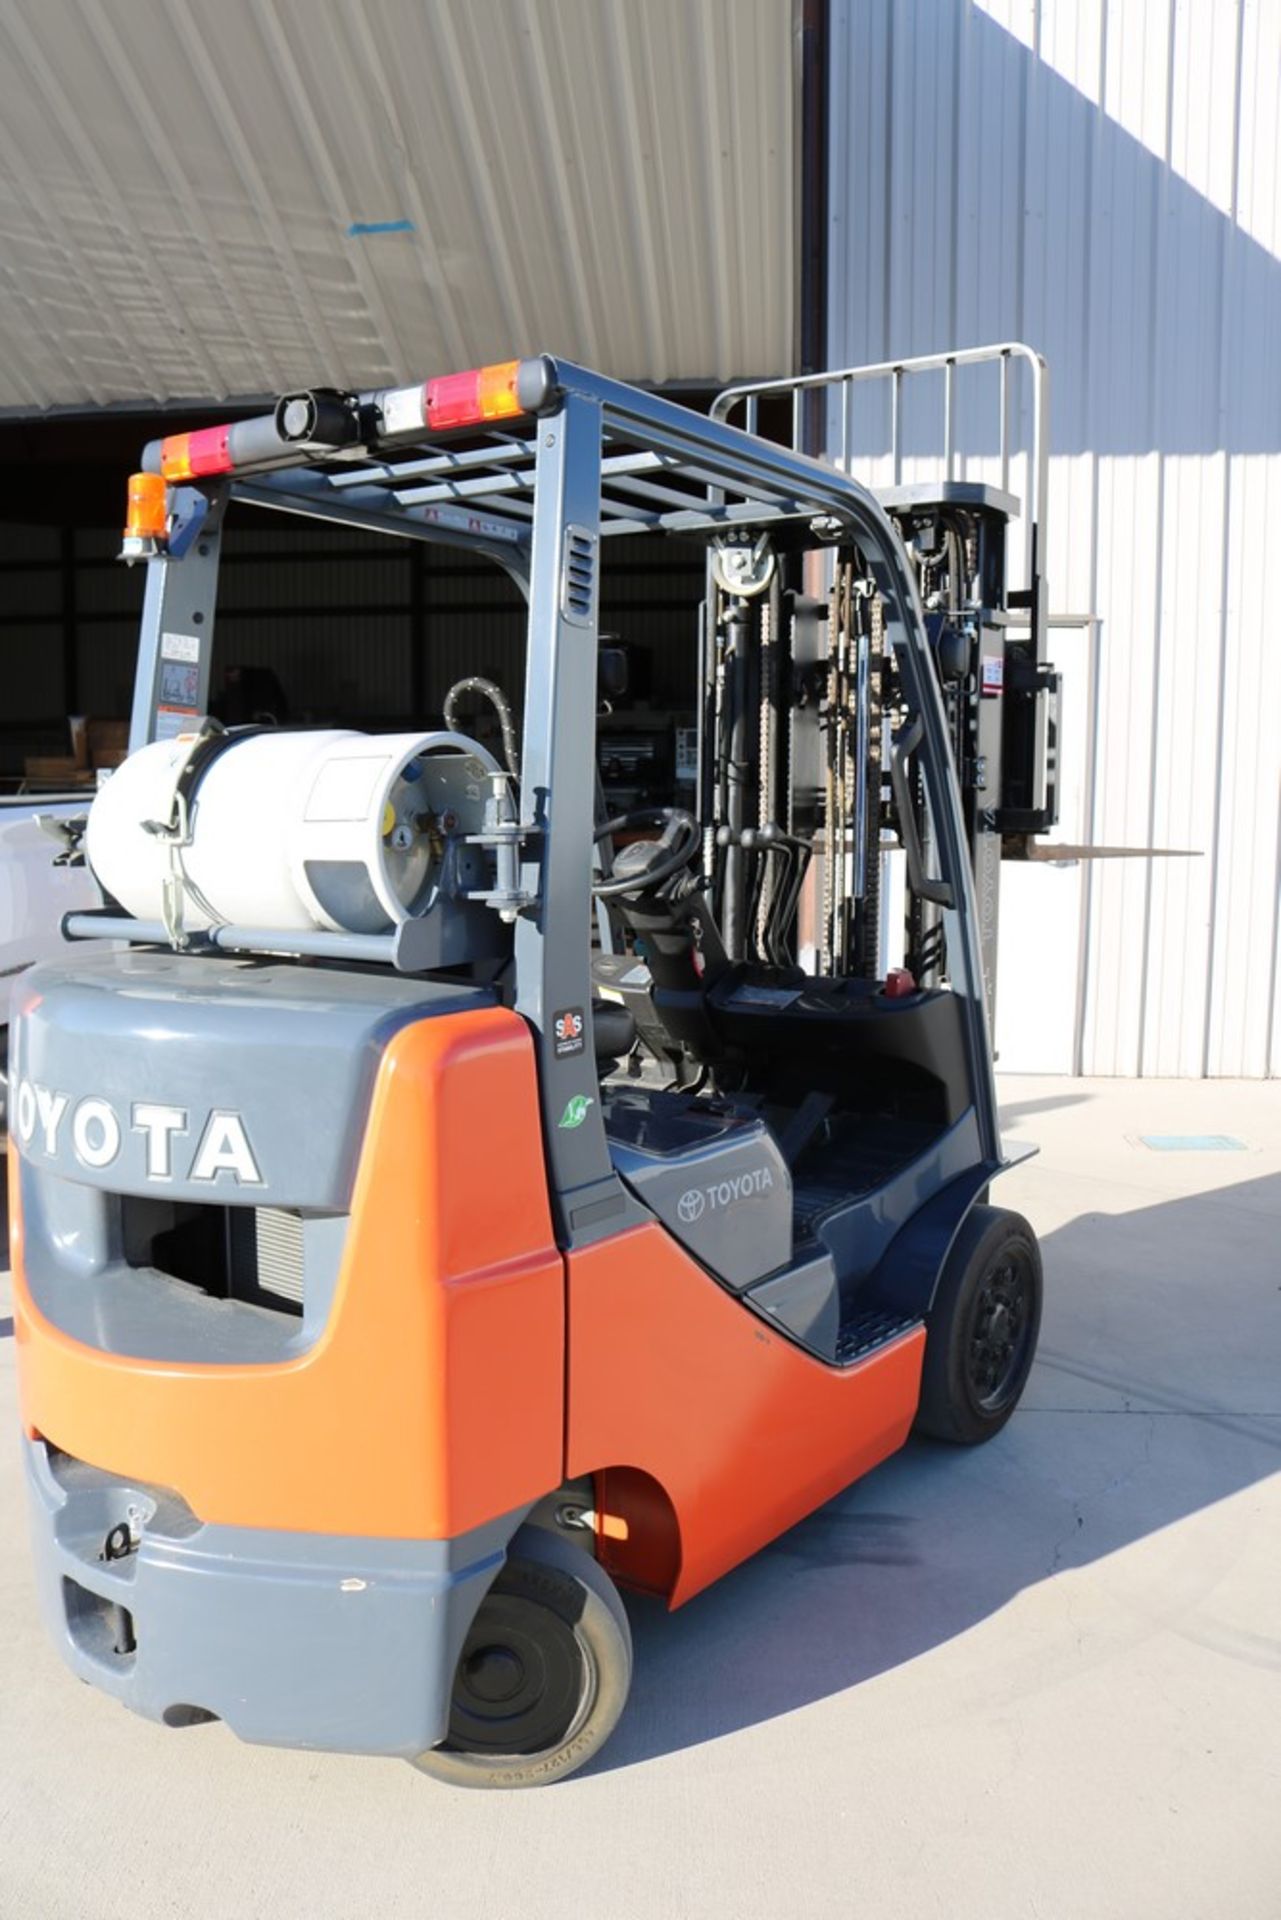 2016 Toyota Forklift Truck 4,500 lbs Capacity, 92 Hours, Side Shift, 5' Forks, Propane - Image 4 of 9